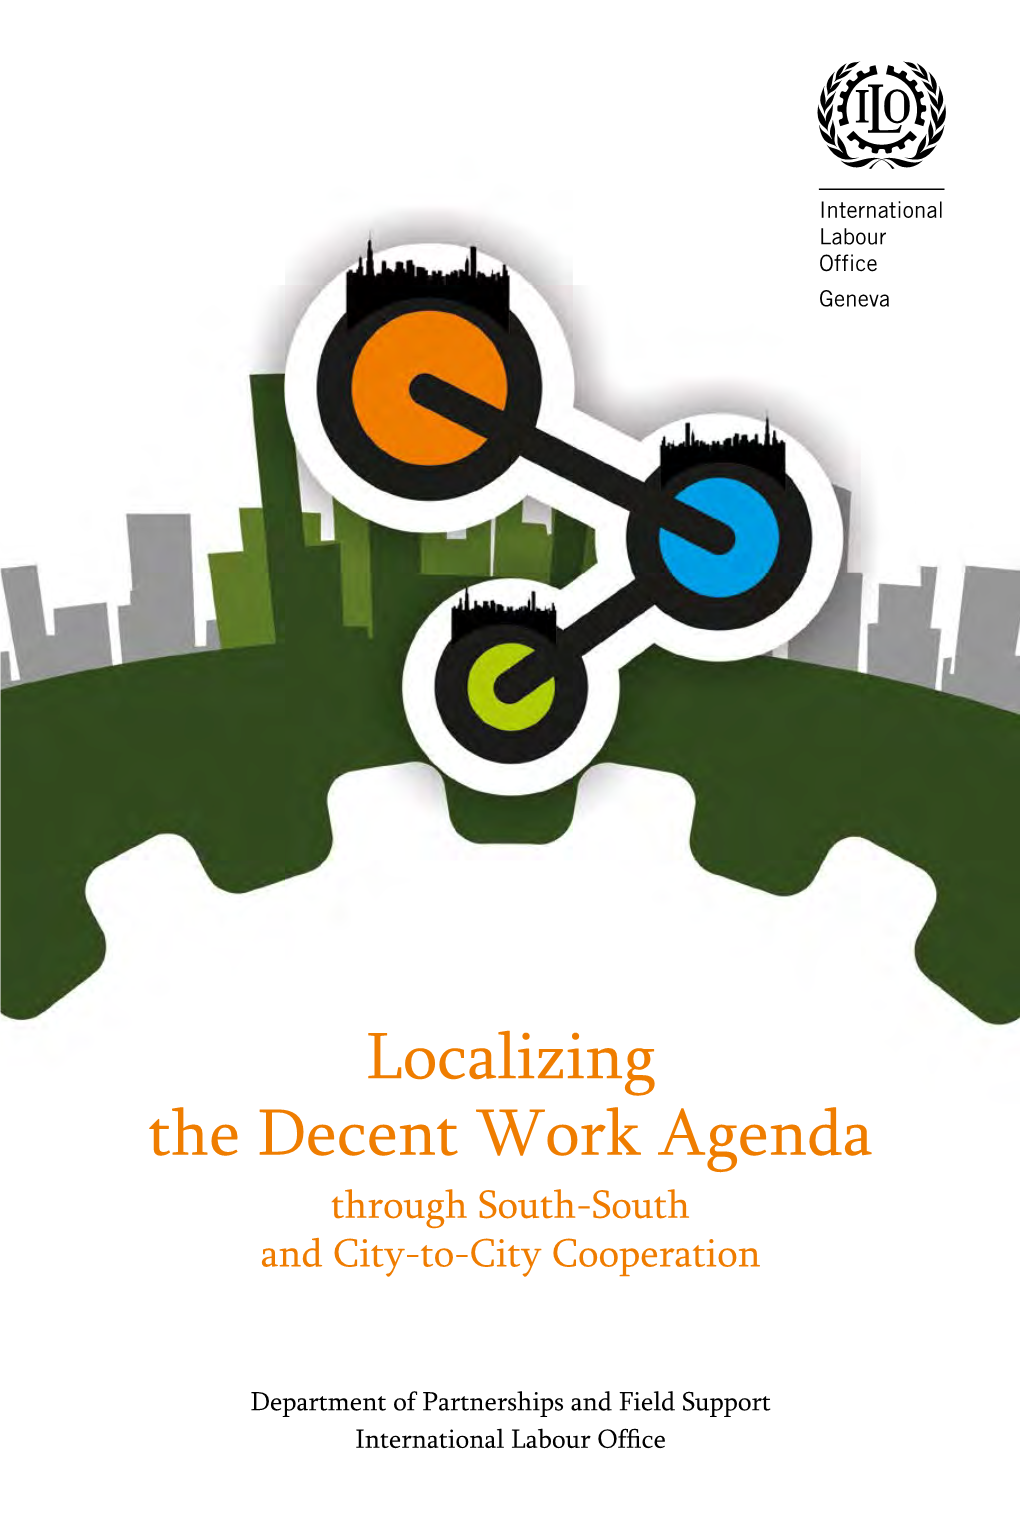 Localizing the Decent Work Agenda Through South-South and City-To-City Cooperation